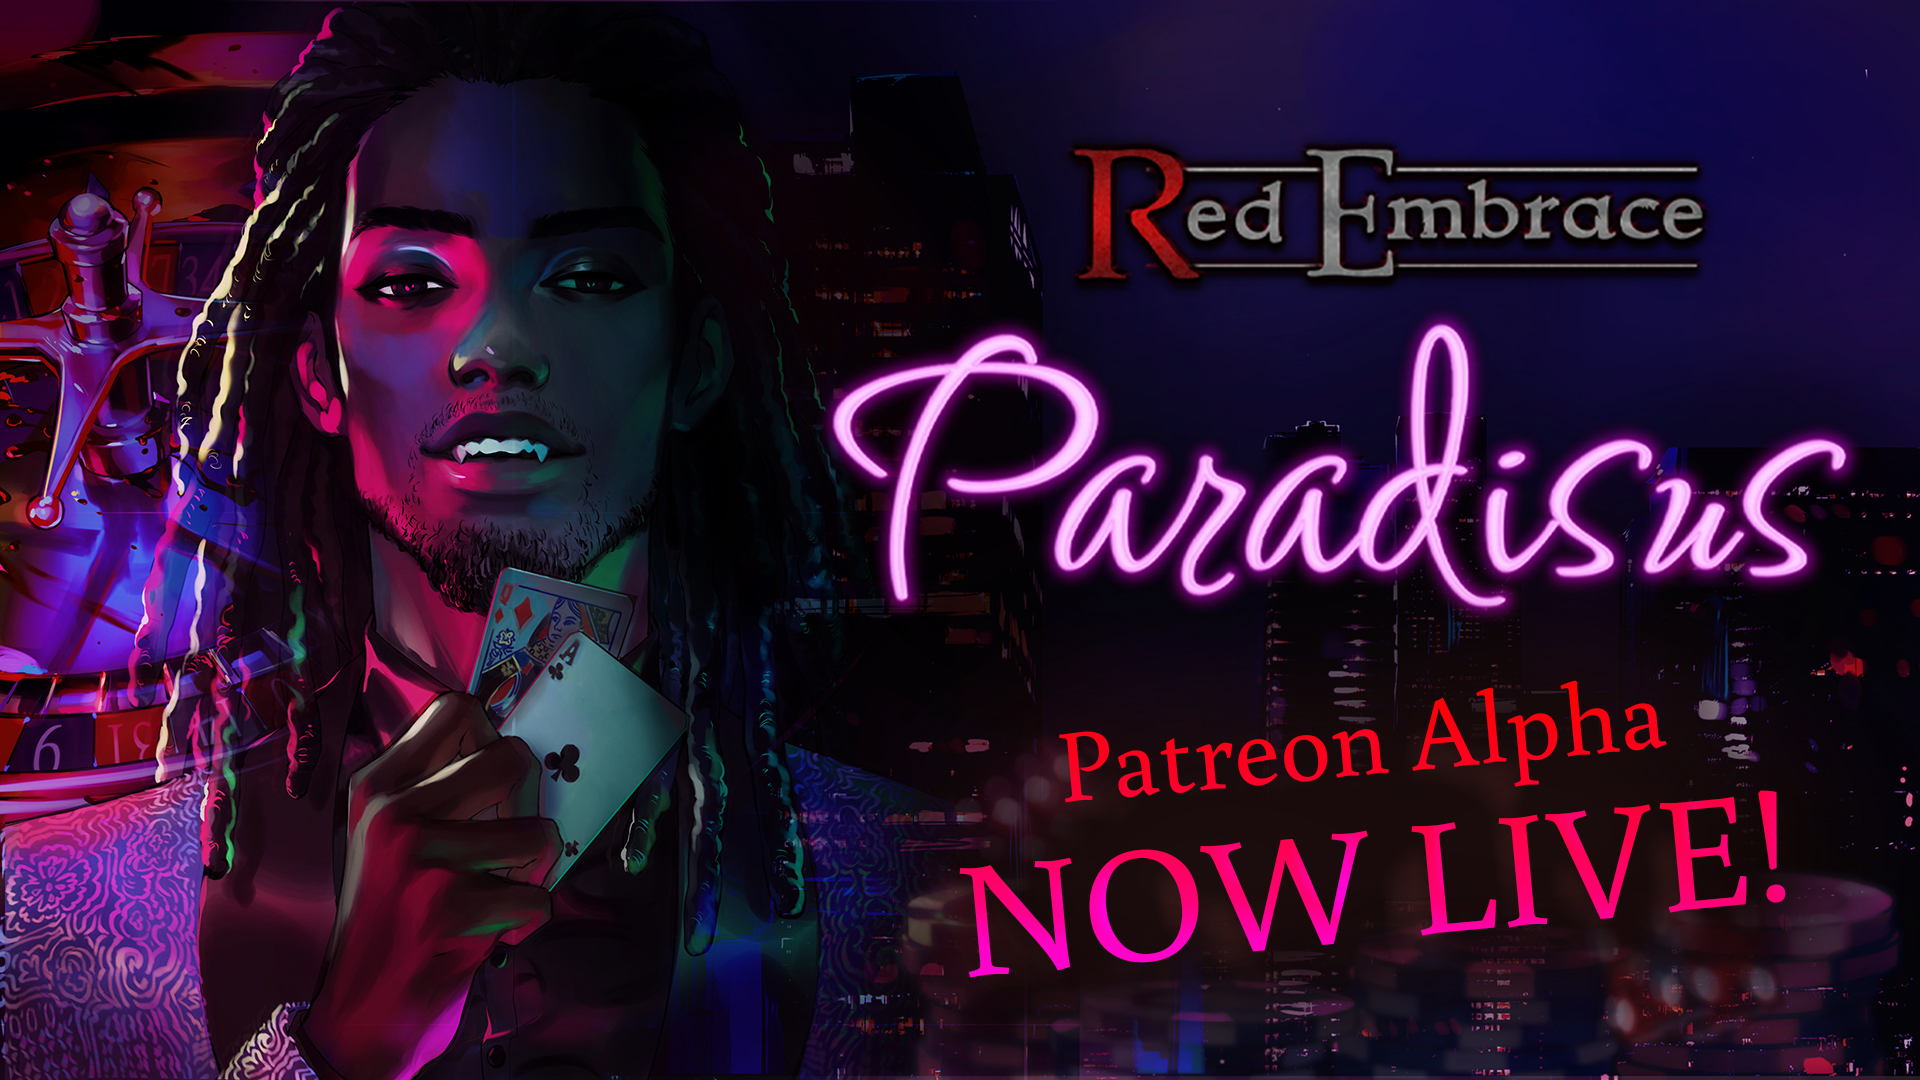 Red Embrace: Paradisus. Night skyline, male character on left staring mysteriously into the depths of your soul while holding a Queen and an Ace card in his hands, surrounded by poker chips and a roulette wheel.